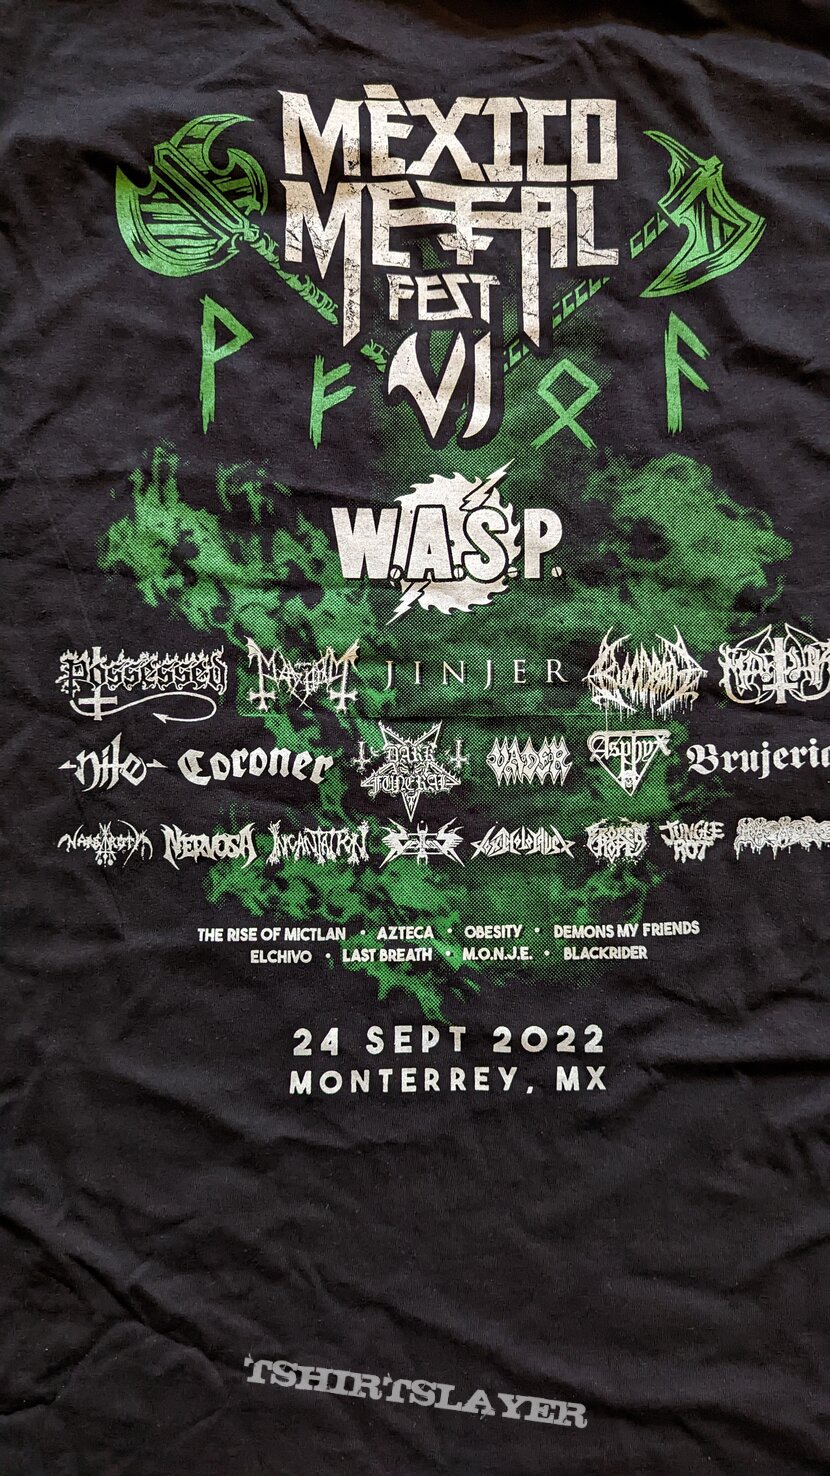 Mexico Metal Fest VI - Day 2 official event shirt